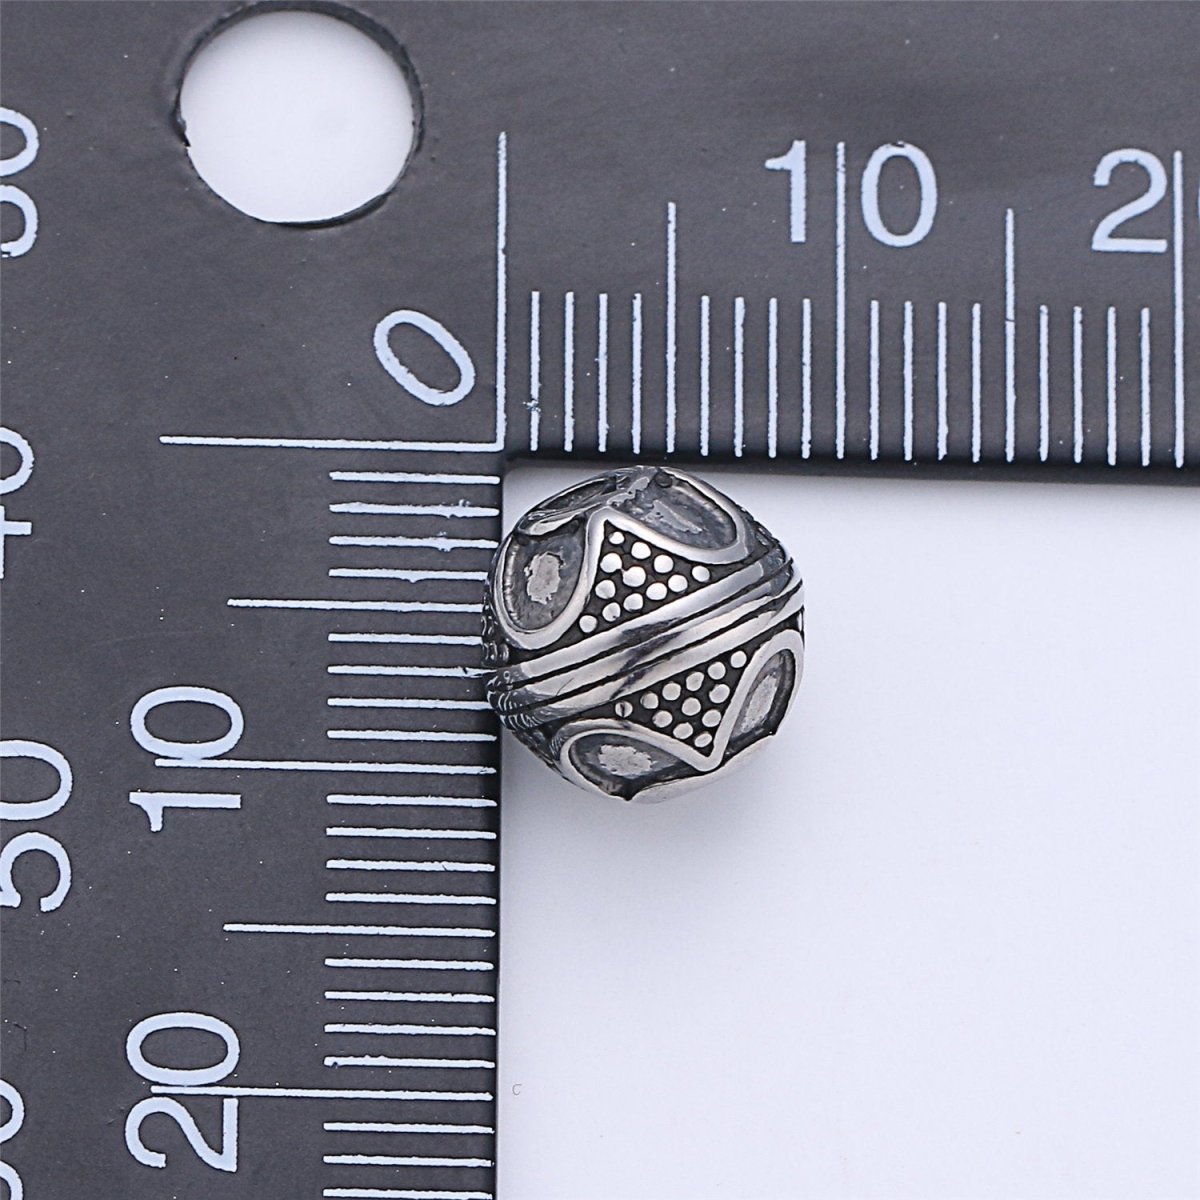 Stainless Steel Lotus Ball Charm Spacer Bead, for DIY Jewelry Making European Charms Beaded Bracelet, Bead Size 11x10mm B-431 - DLUXCA